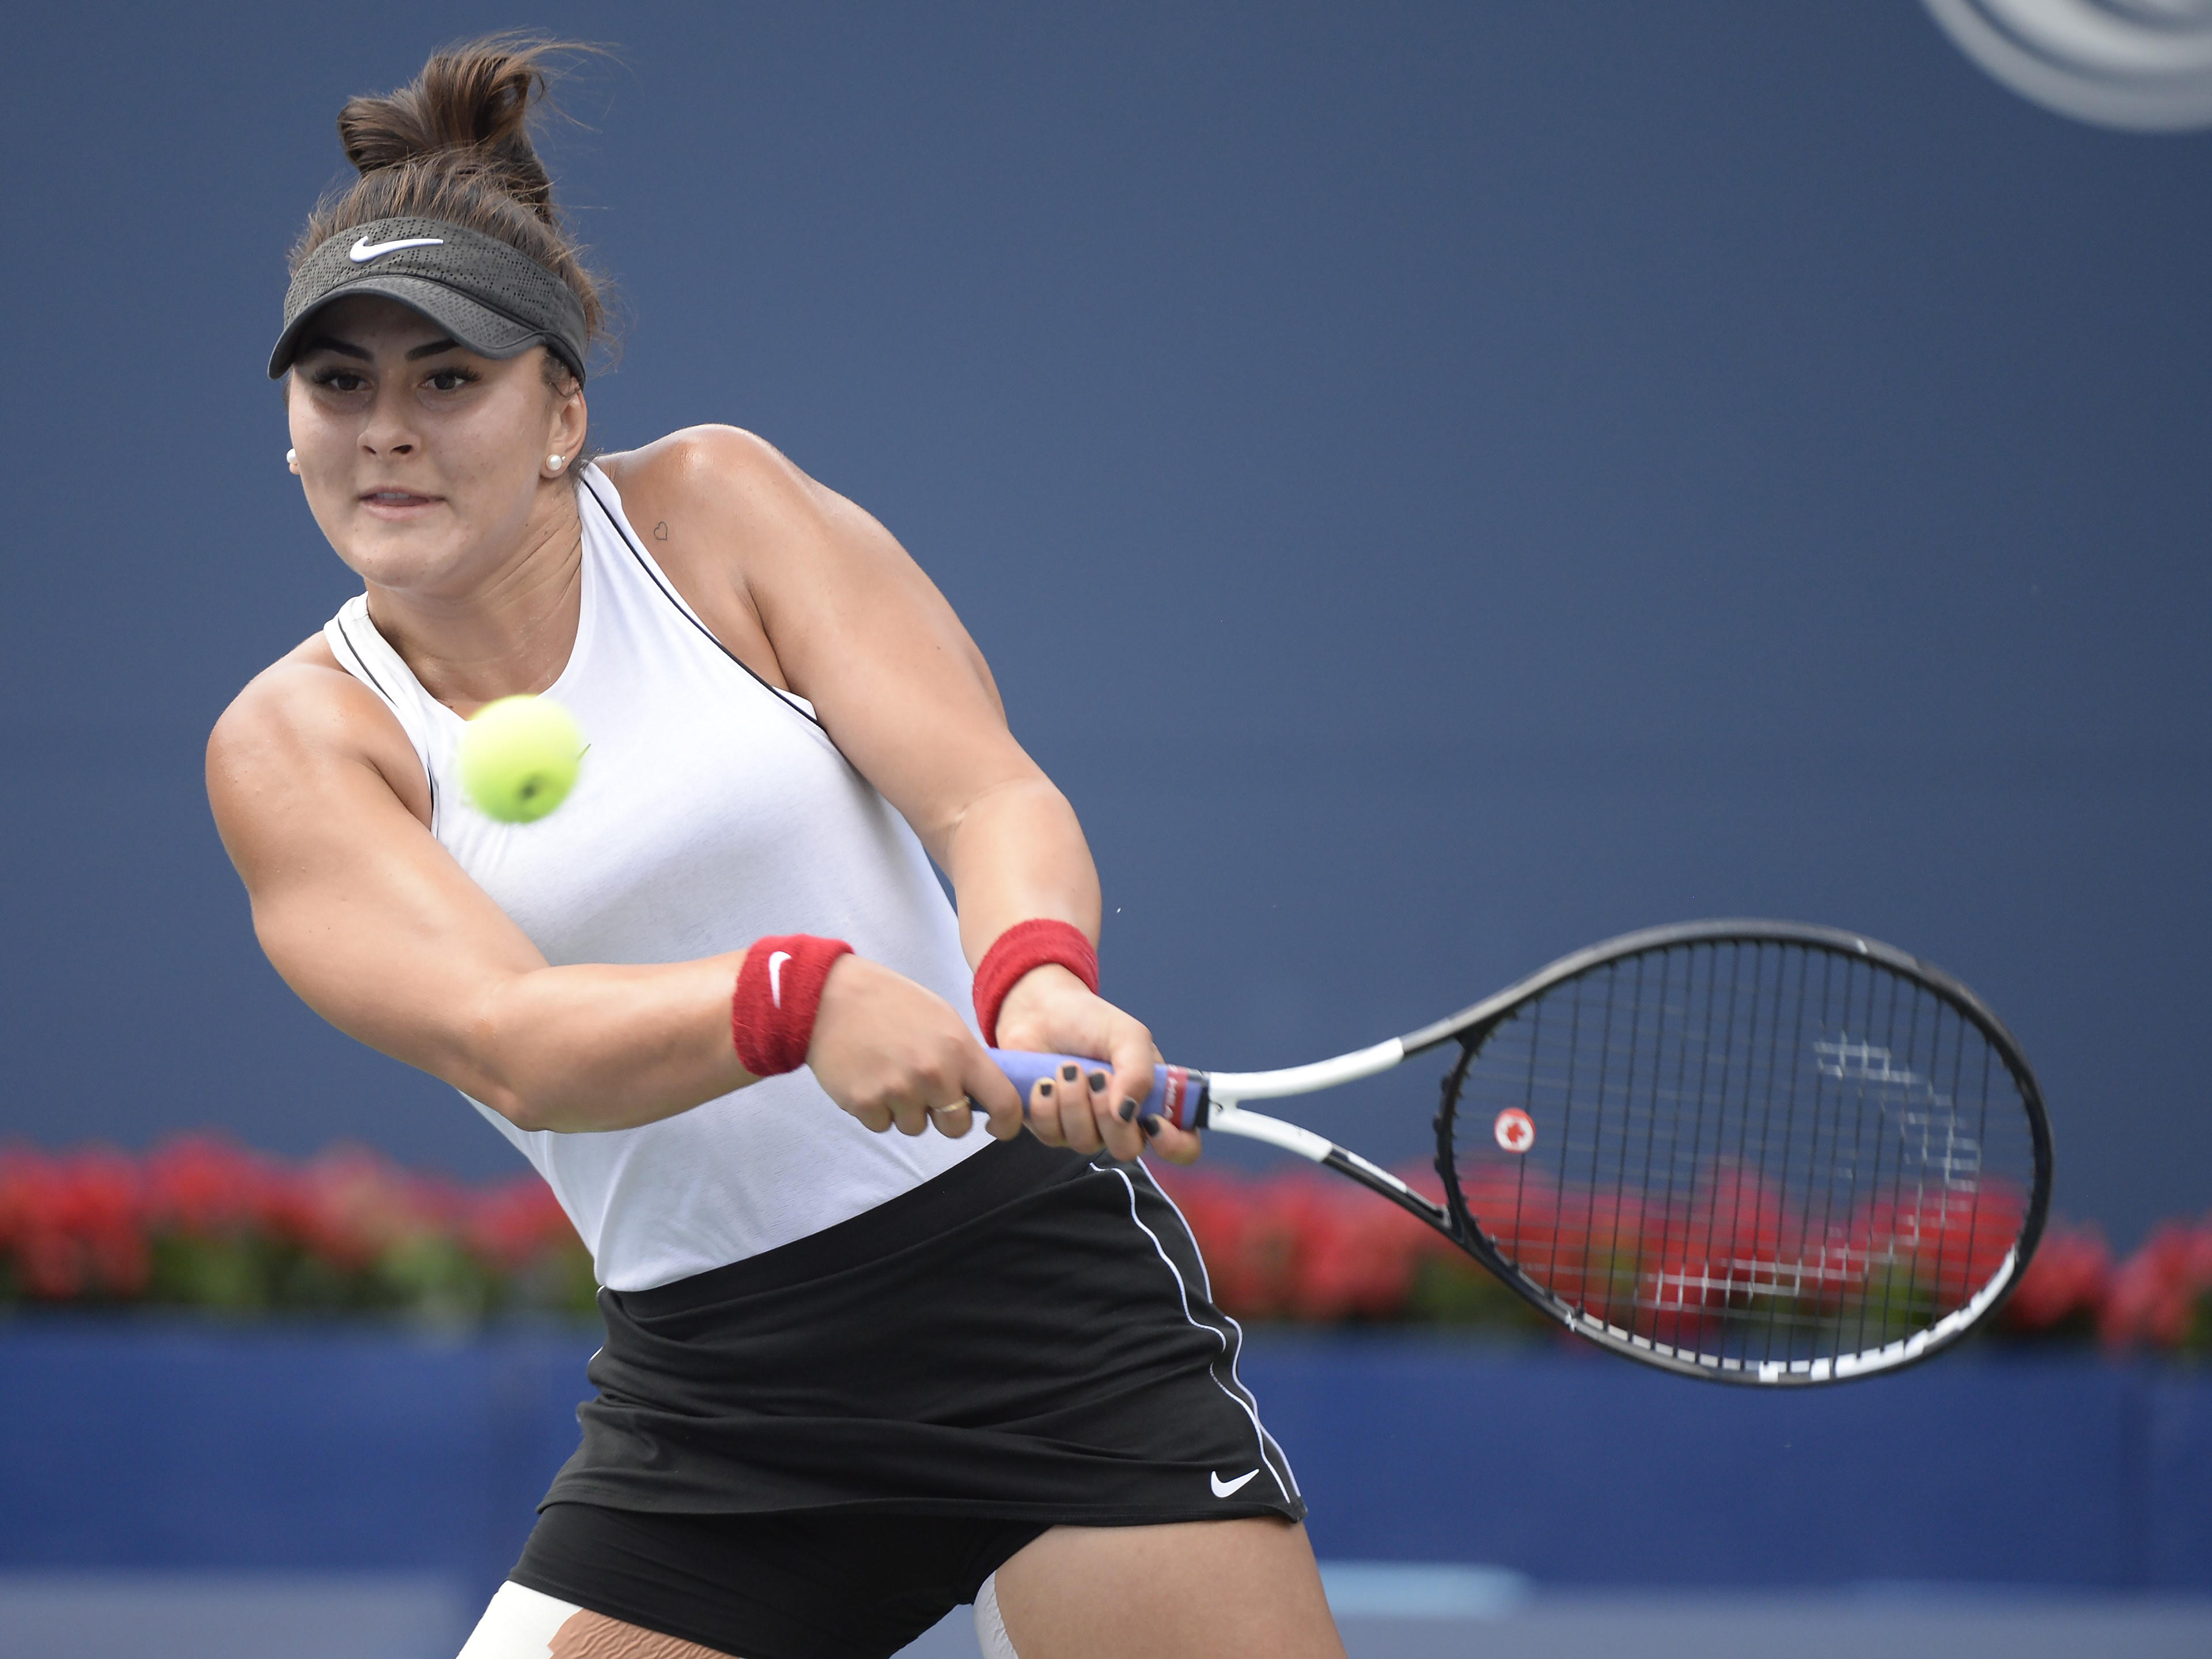 Canadian teen Andreescu wins Rogers Cup, Williams retires - 660 NEWS